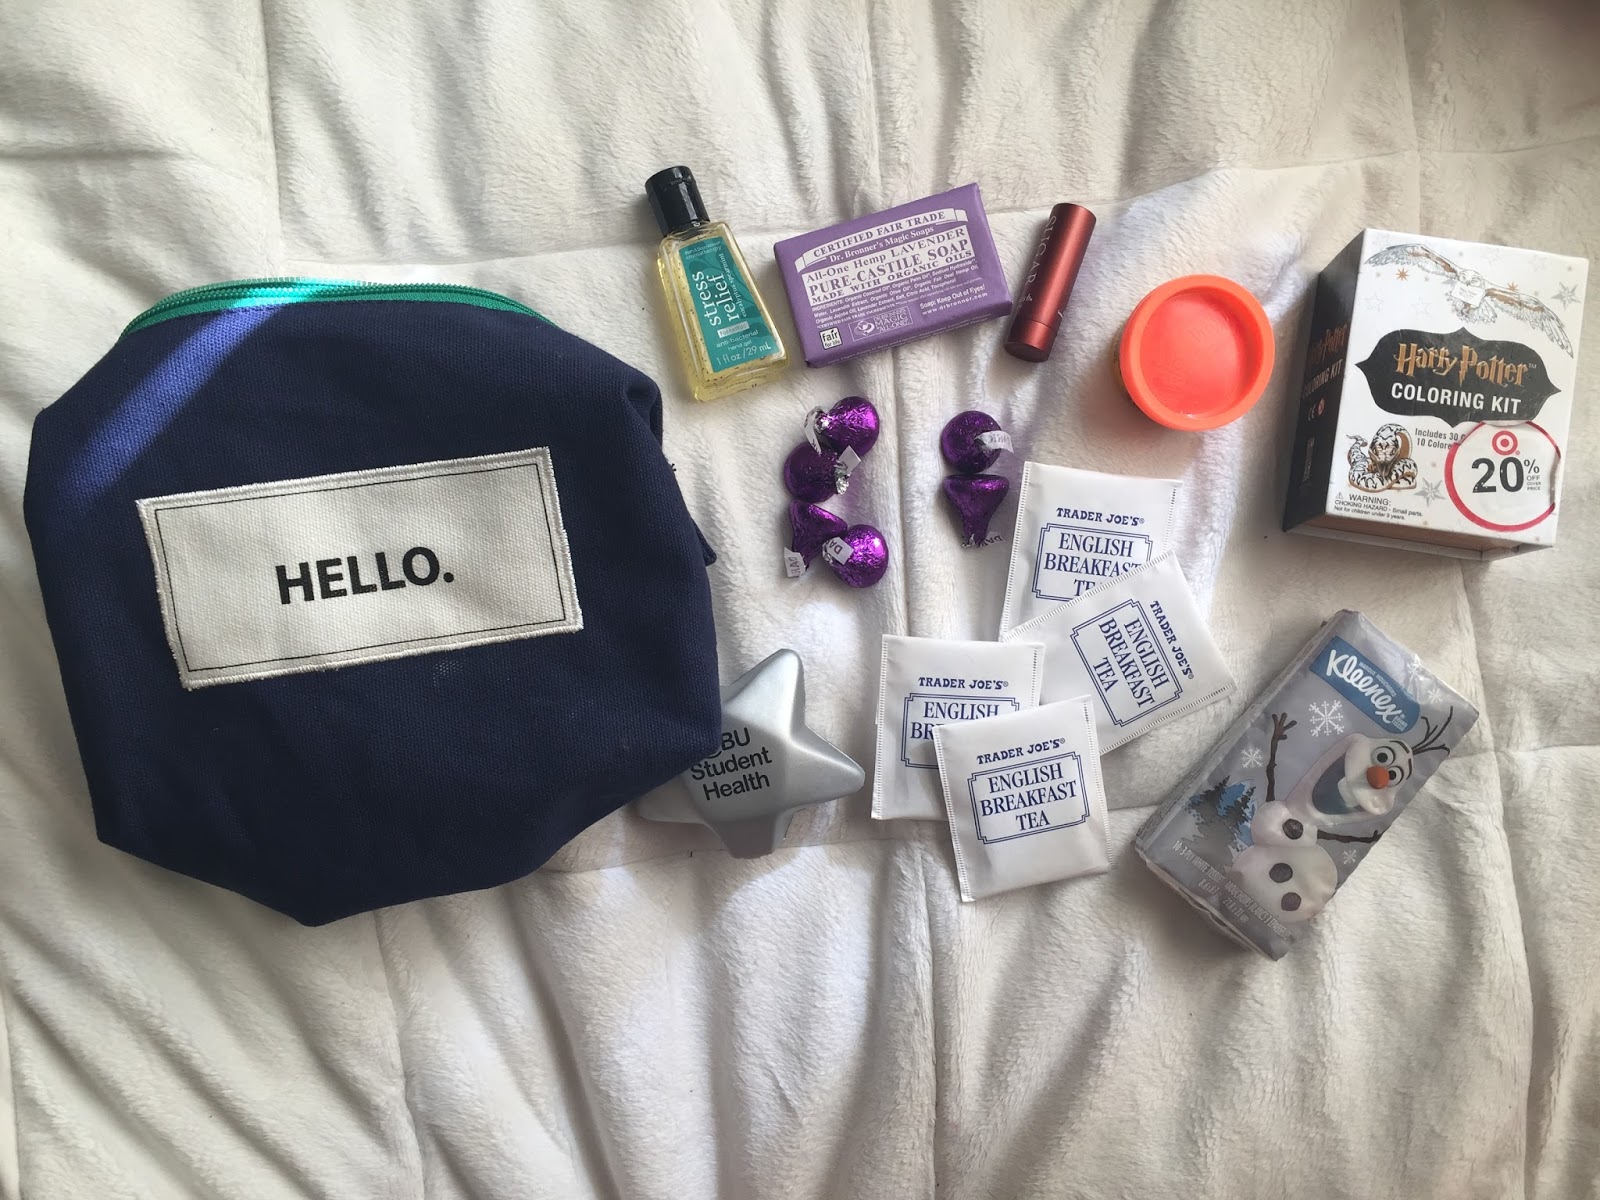 A College Student's Guide on How to Create an Affordable Self-Care Kit